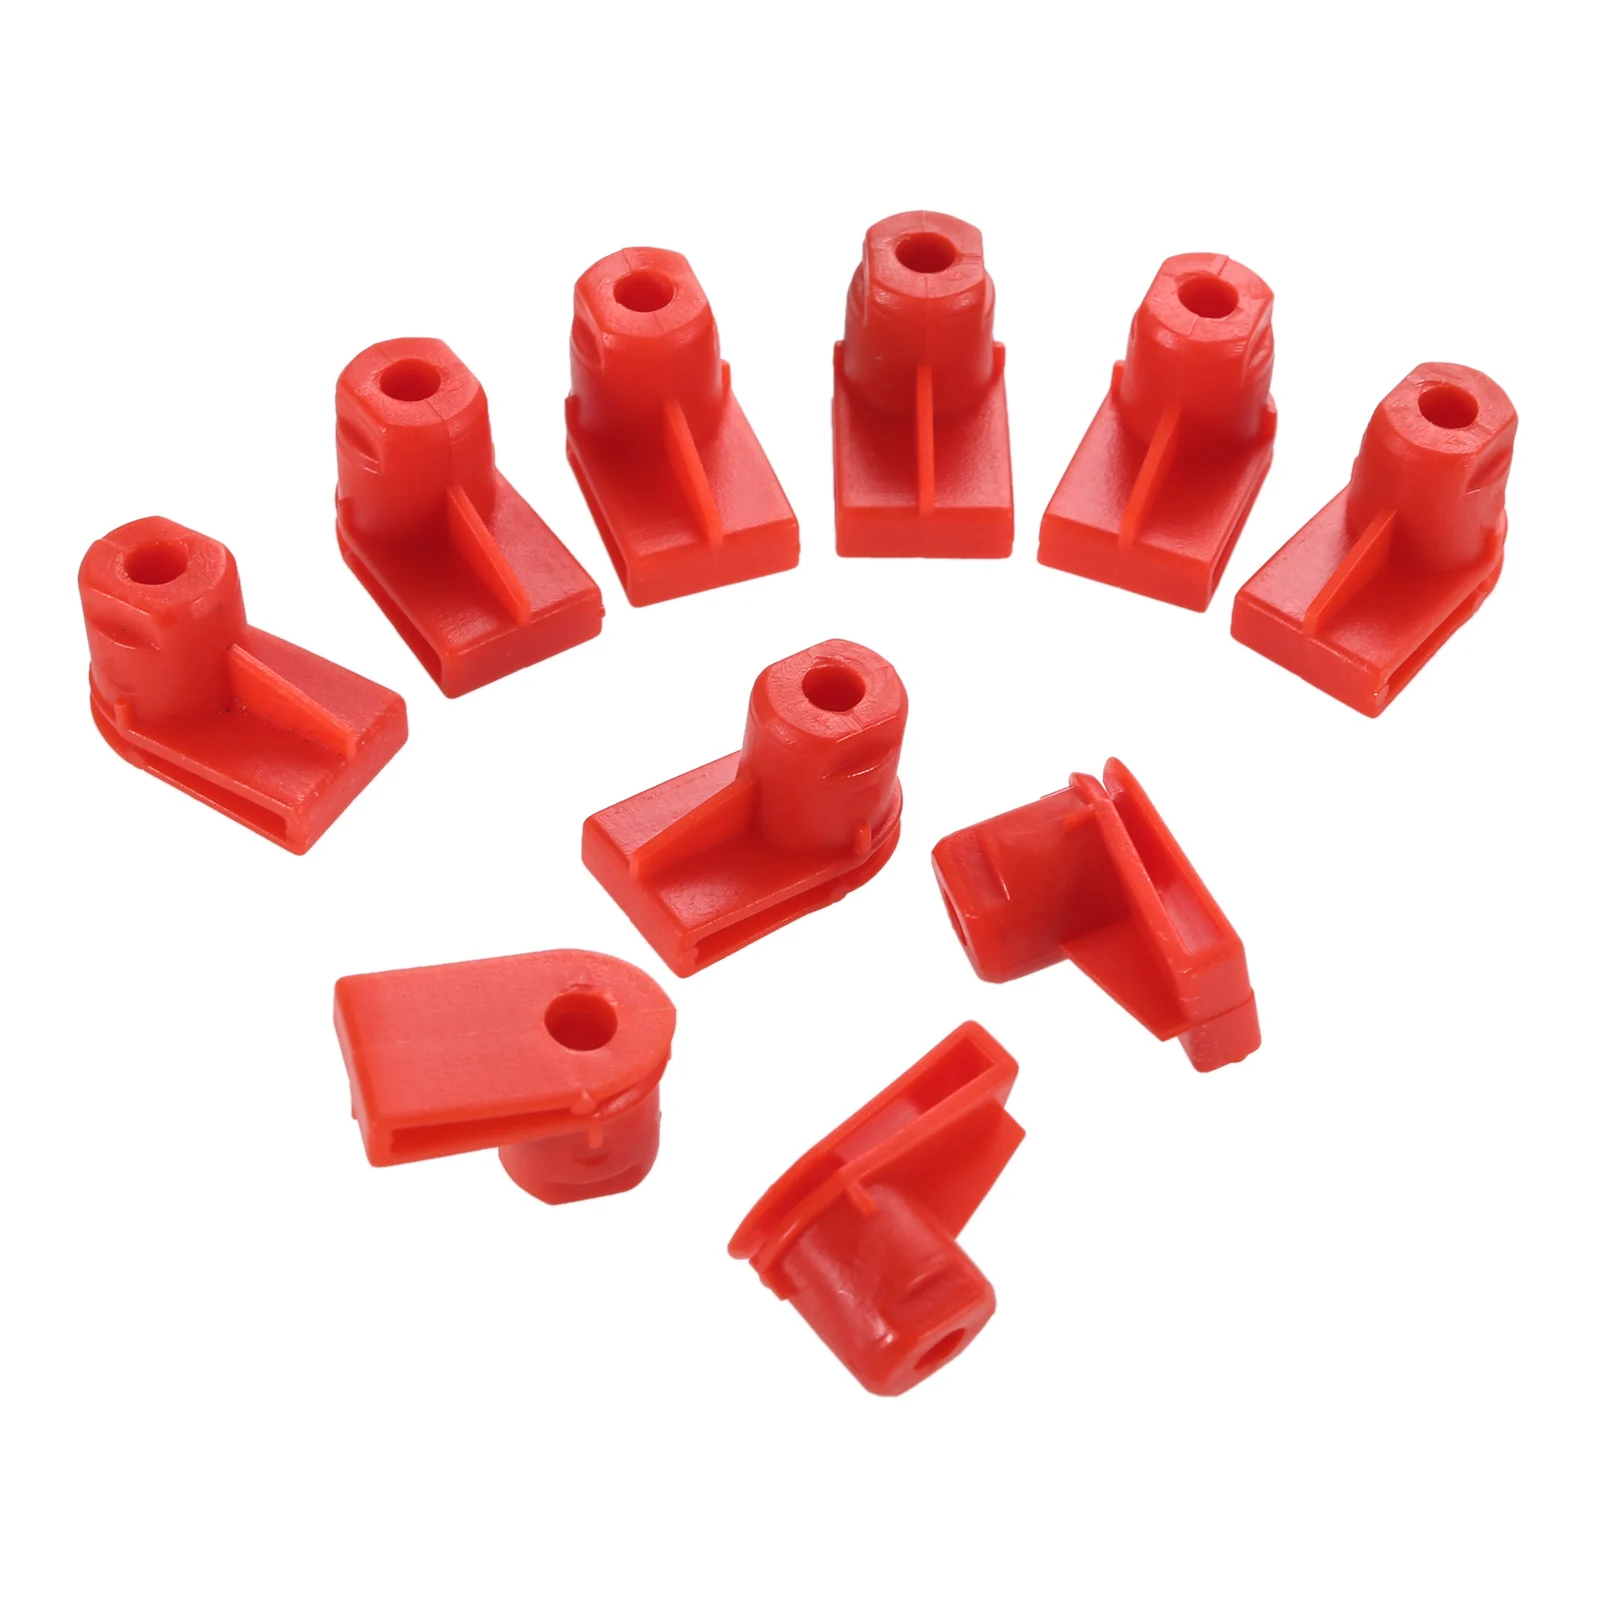 

10 Pcs Red Plastic Bumper Clips Wing Mounting Grommet Nuts Screws Fit For Opel For Vauxhall Part Number 1404969 / 24449408